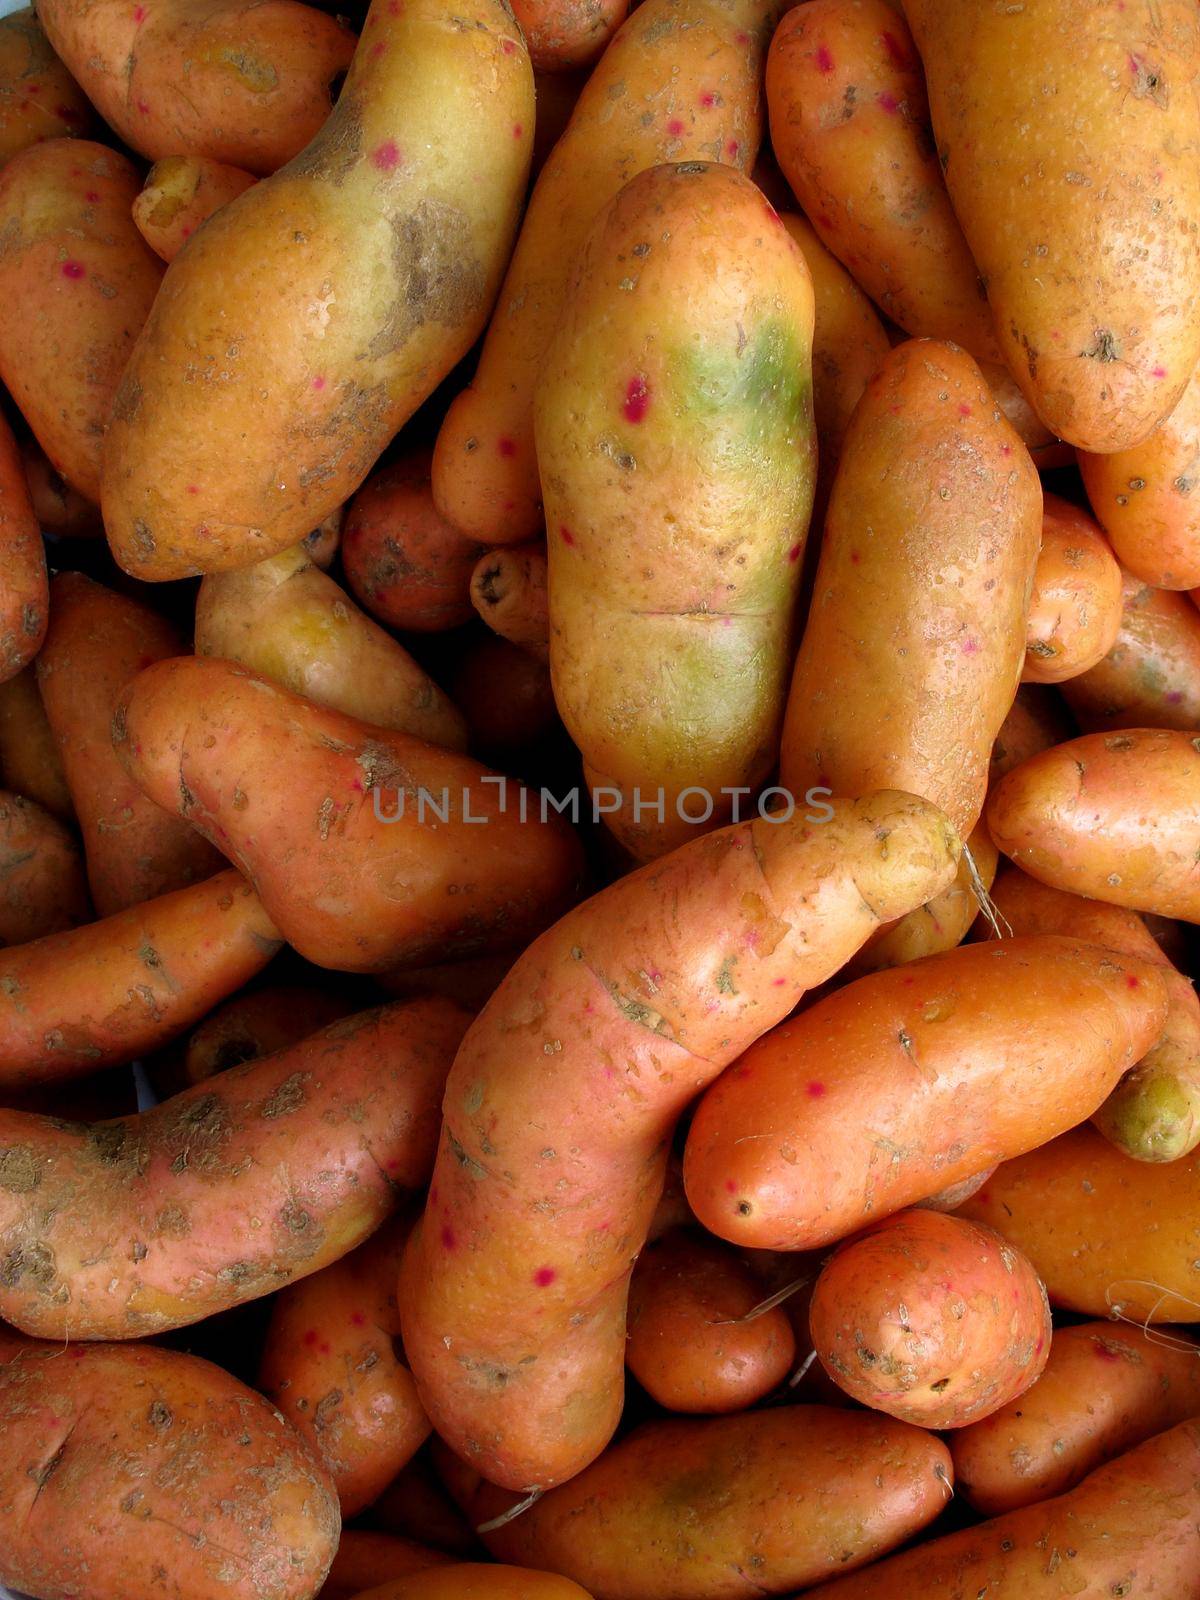 Olluquito background. Peruvian tuber - vegetable collection